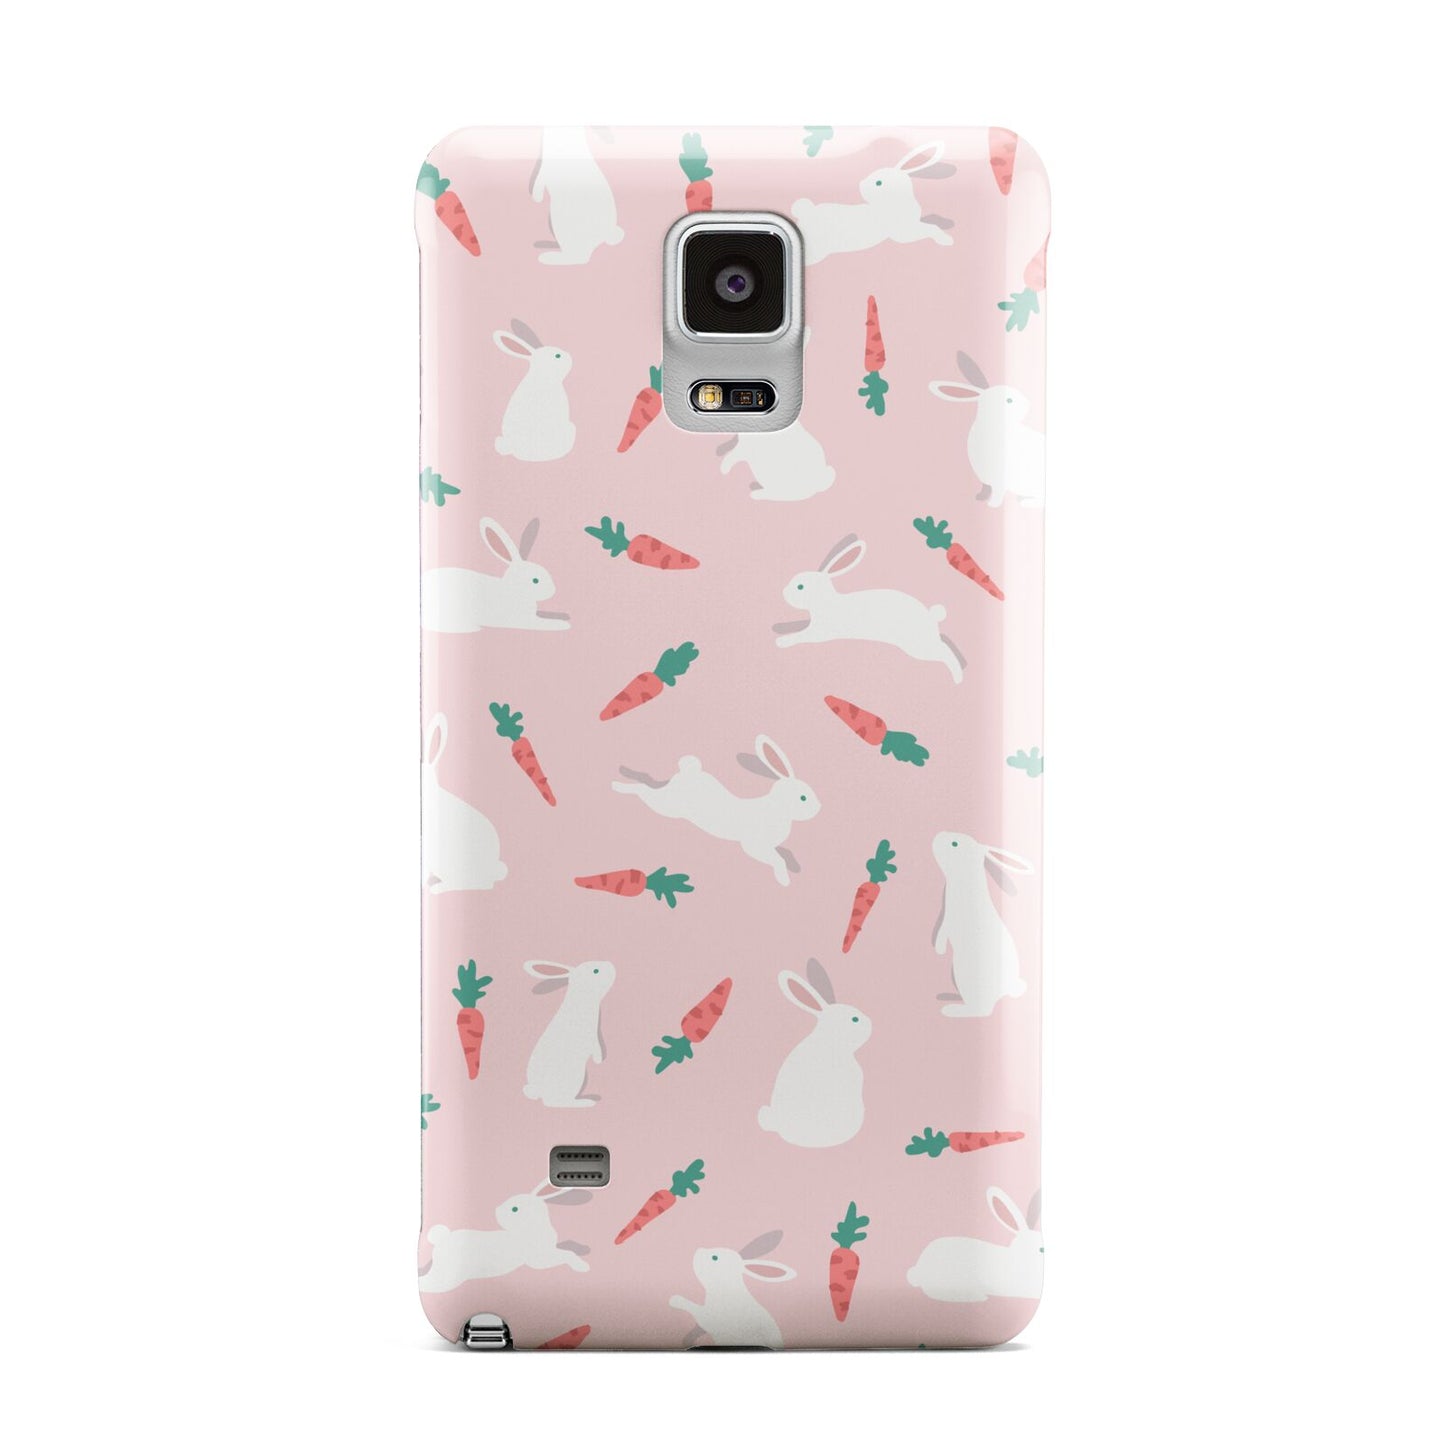 Easter Bunny And Carrot Samsung Galaxy Note 4 Case